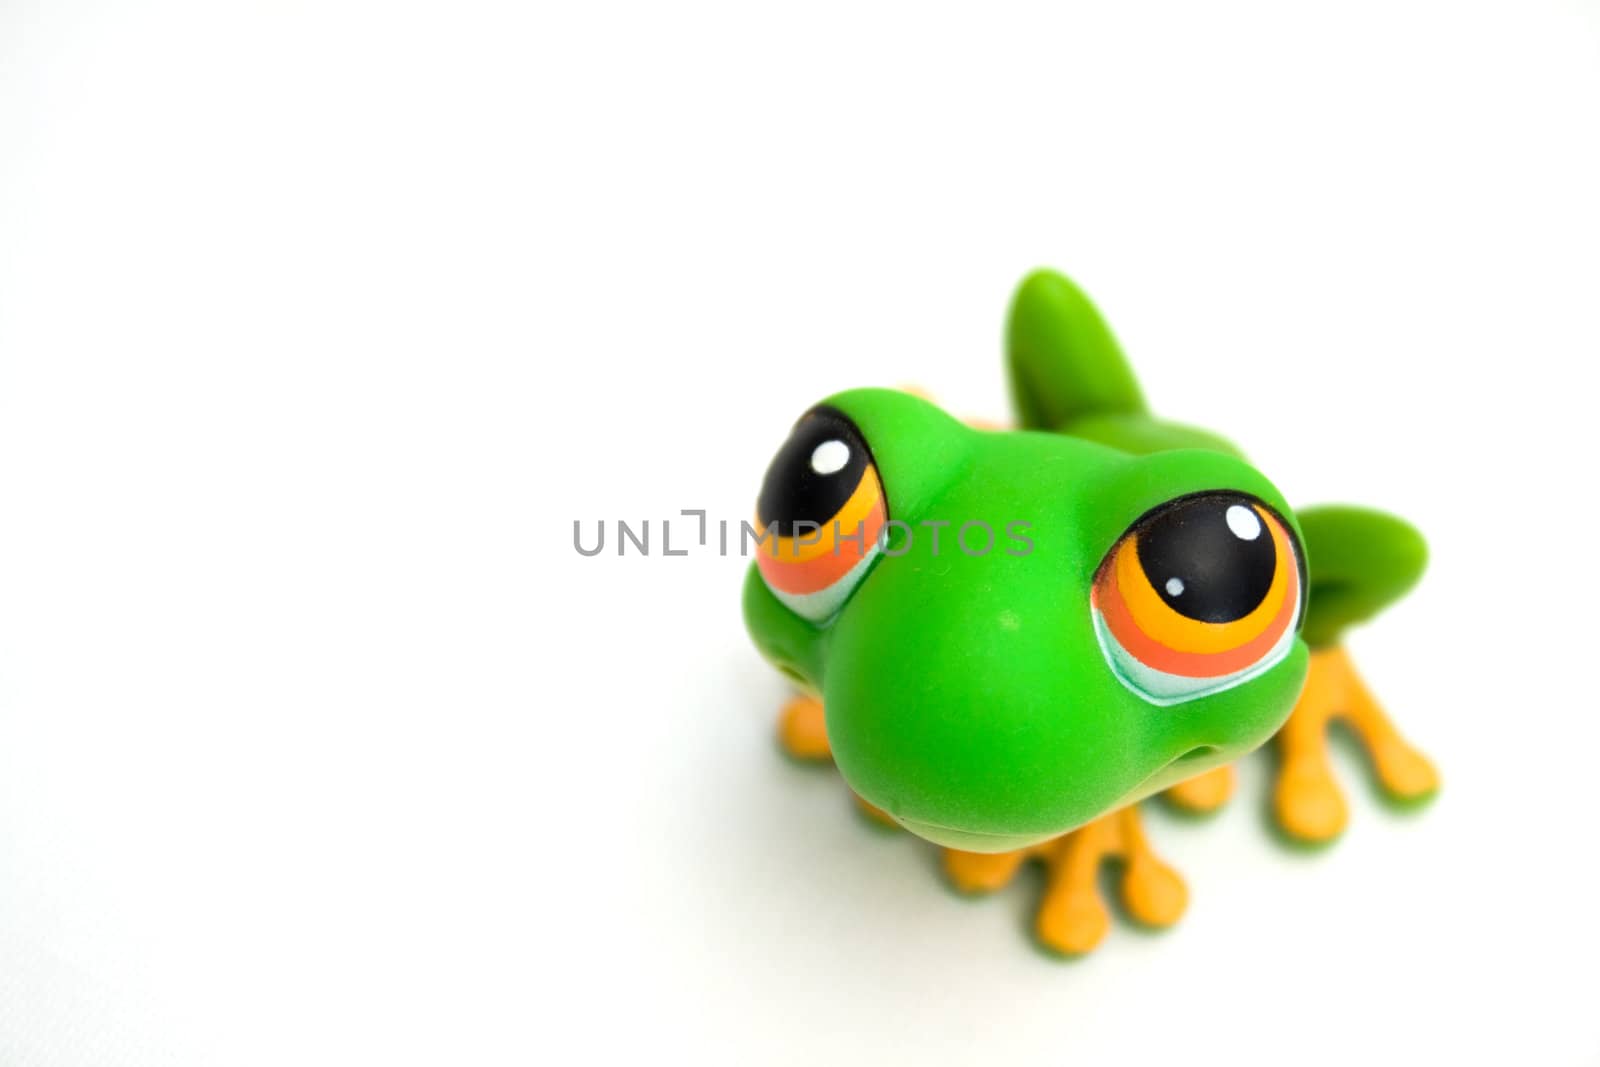 Green frog toy isolated on white background.